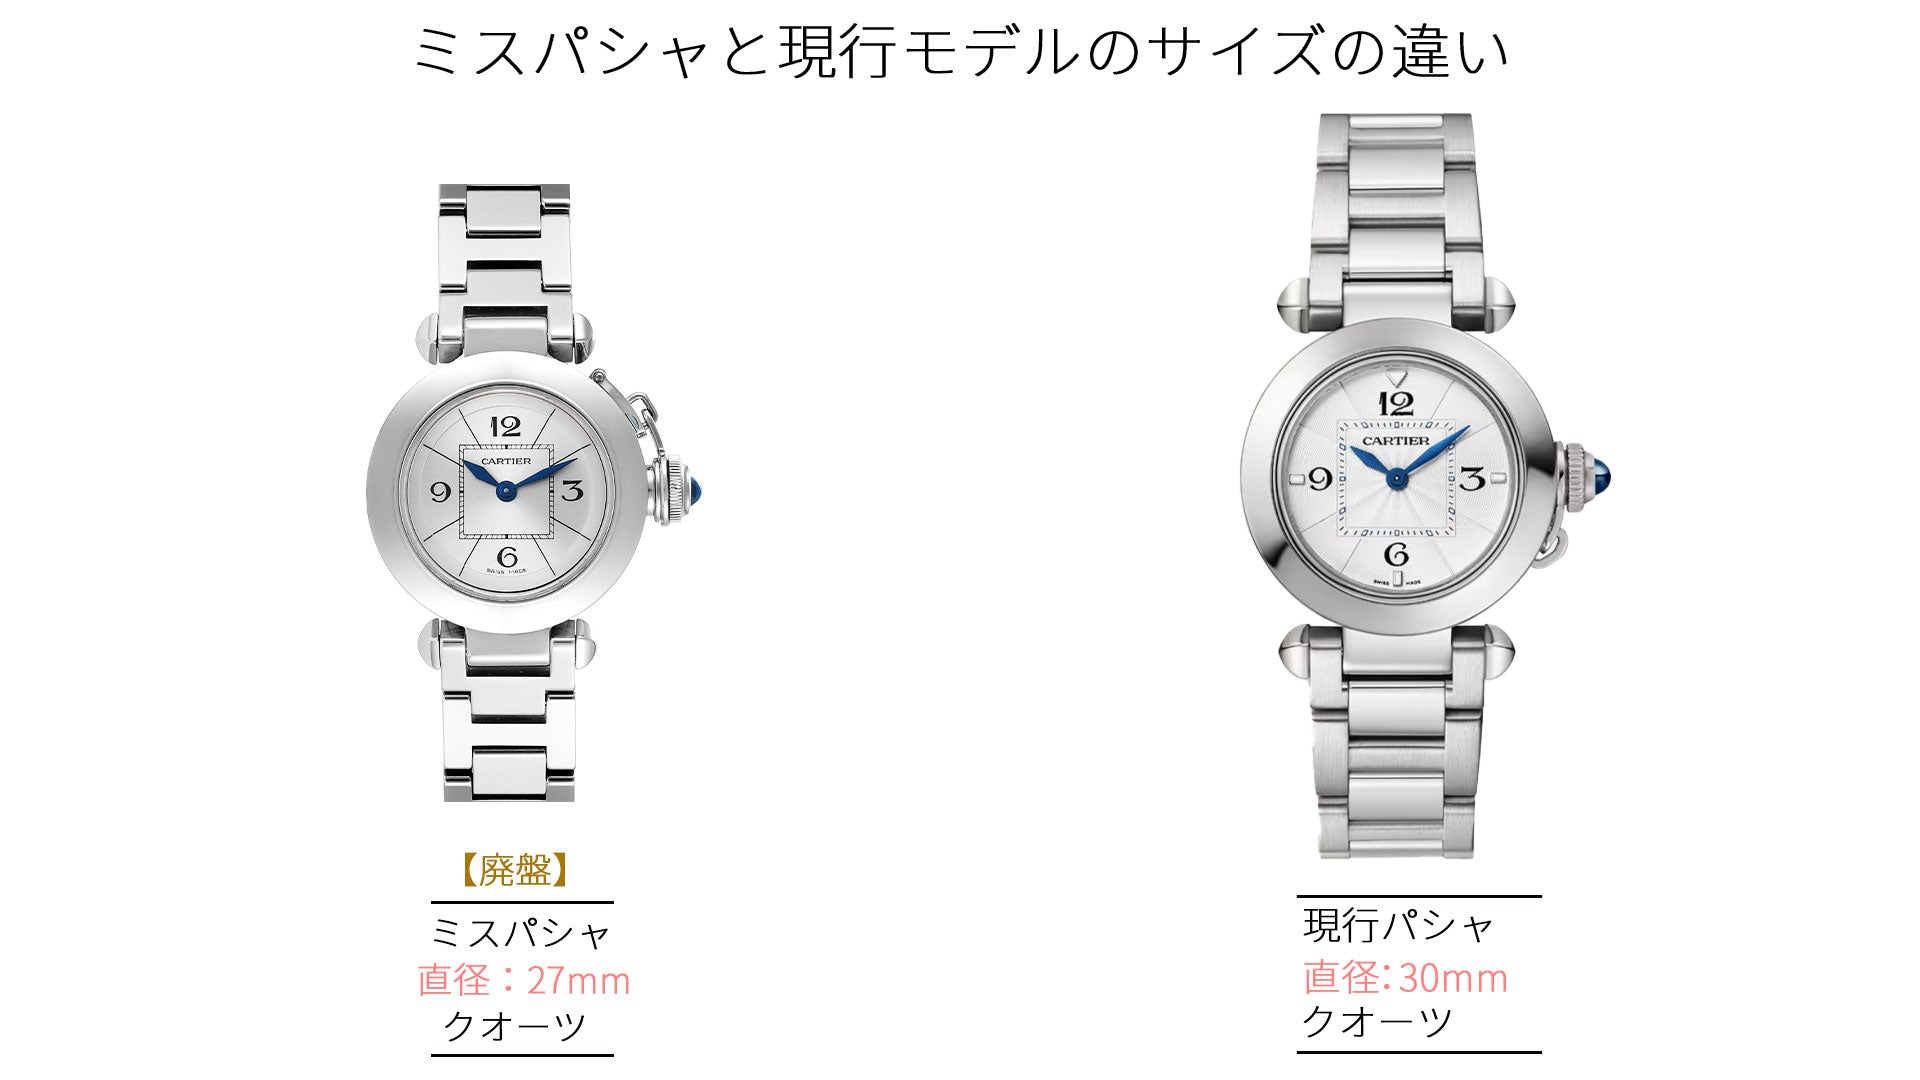 Cartier watch: Comparison of size between Miss Pasha and current Pasha line